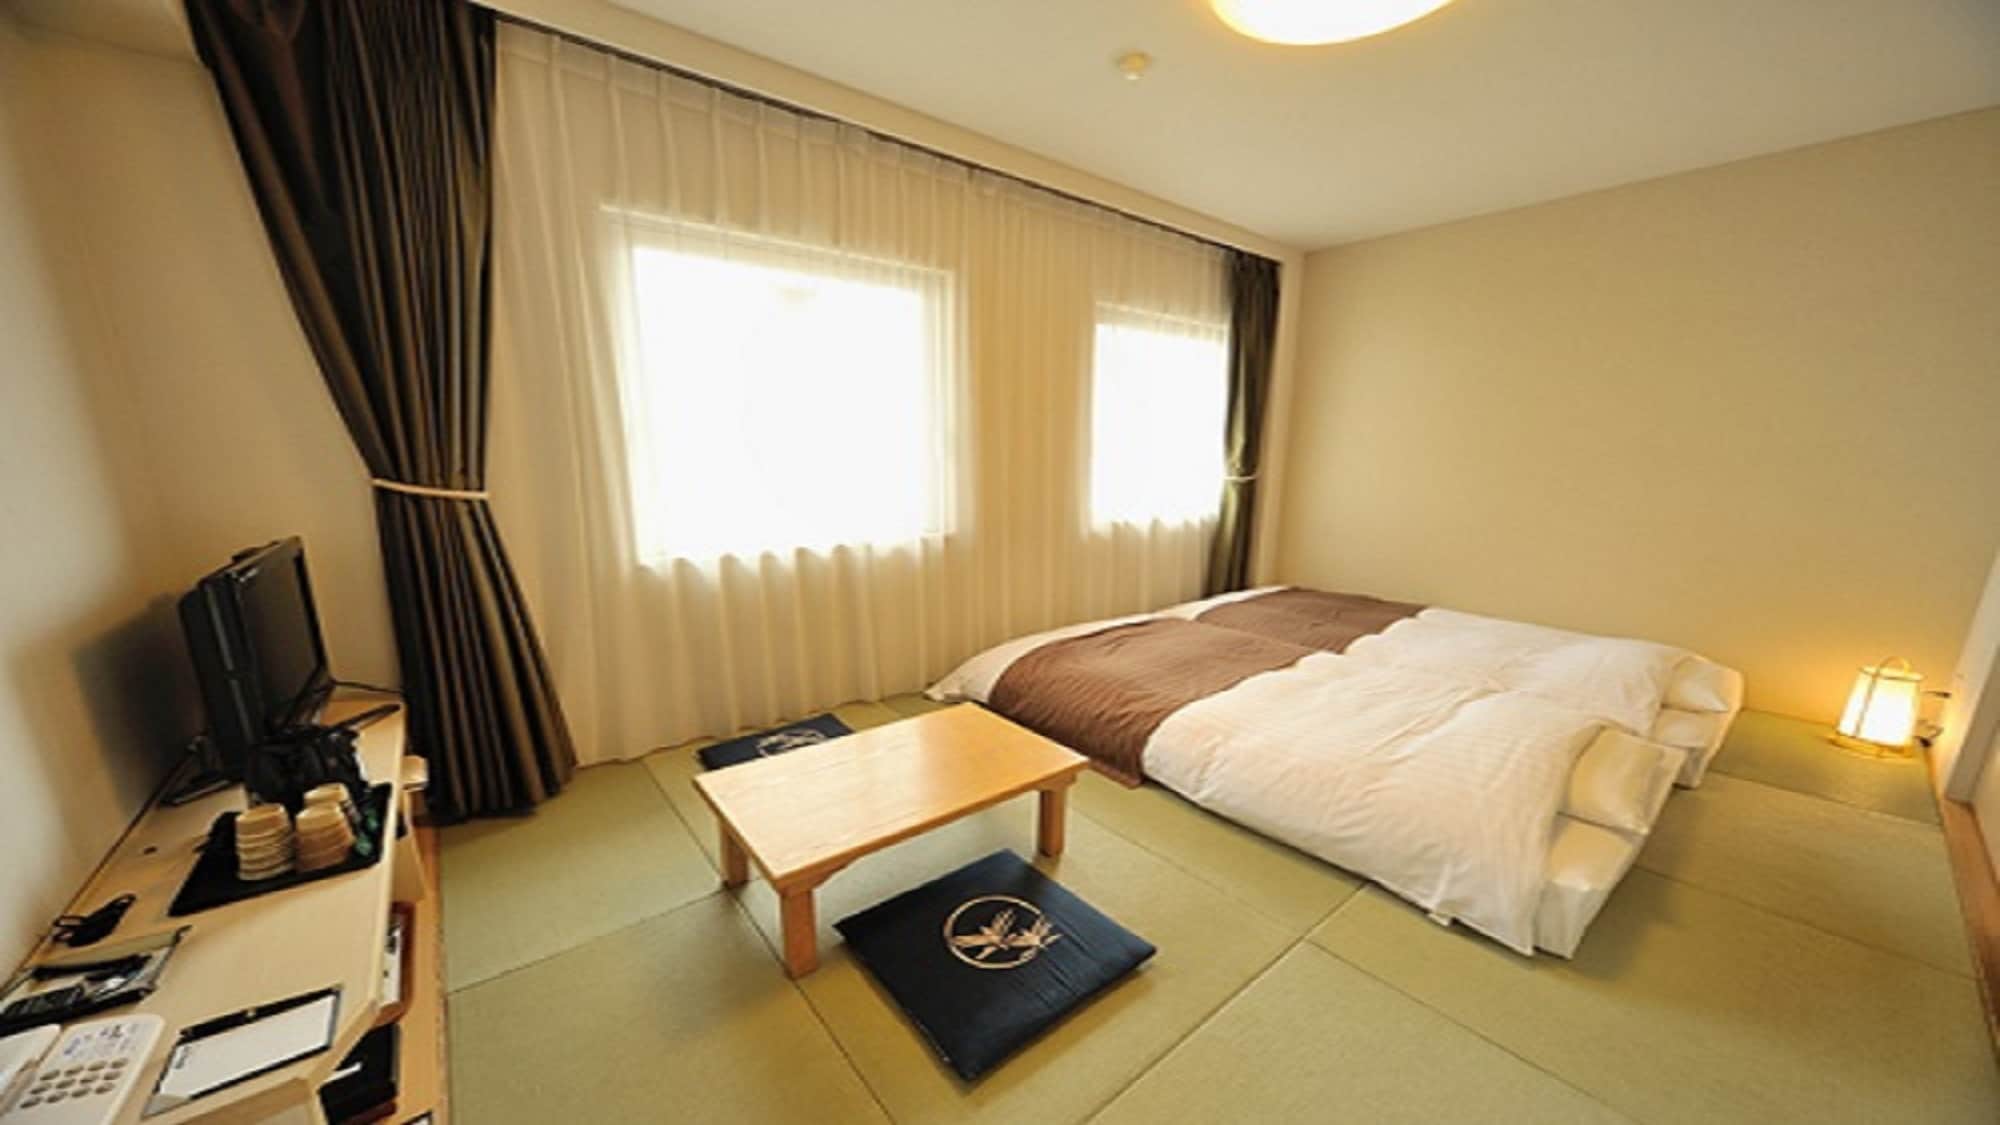 ■ Japanese-style room [No smoking] (100 & times; 200 cm Japanese futon 3 sheets) 23 square meters